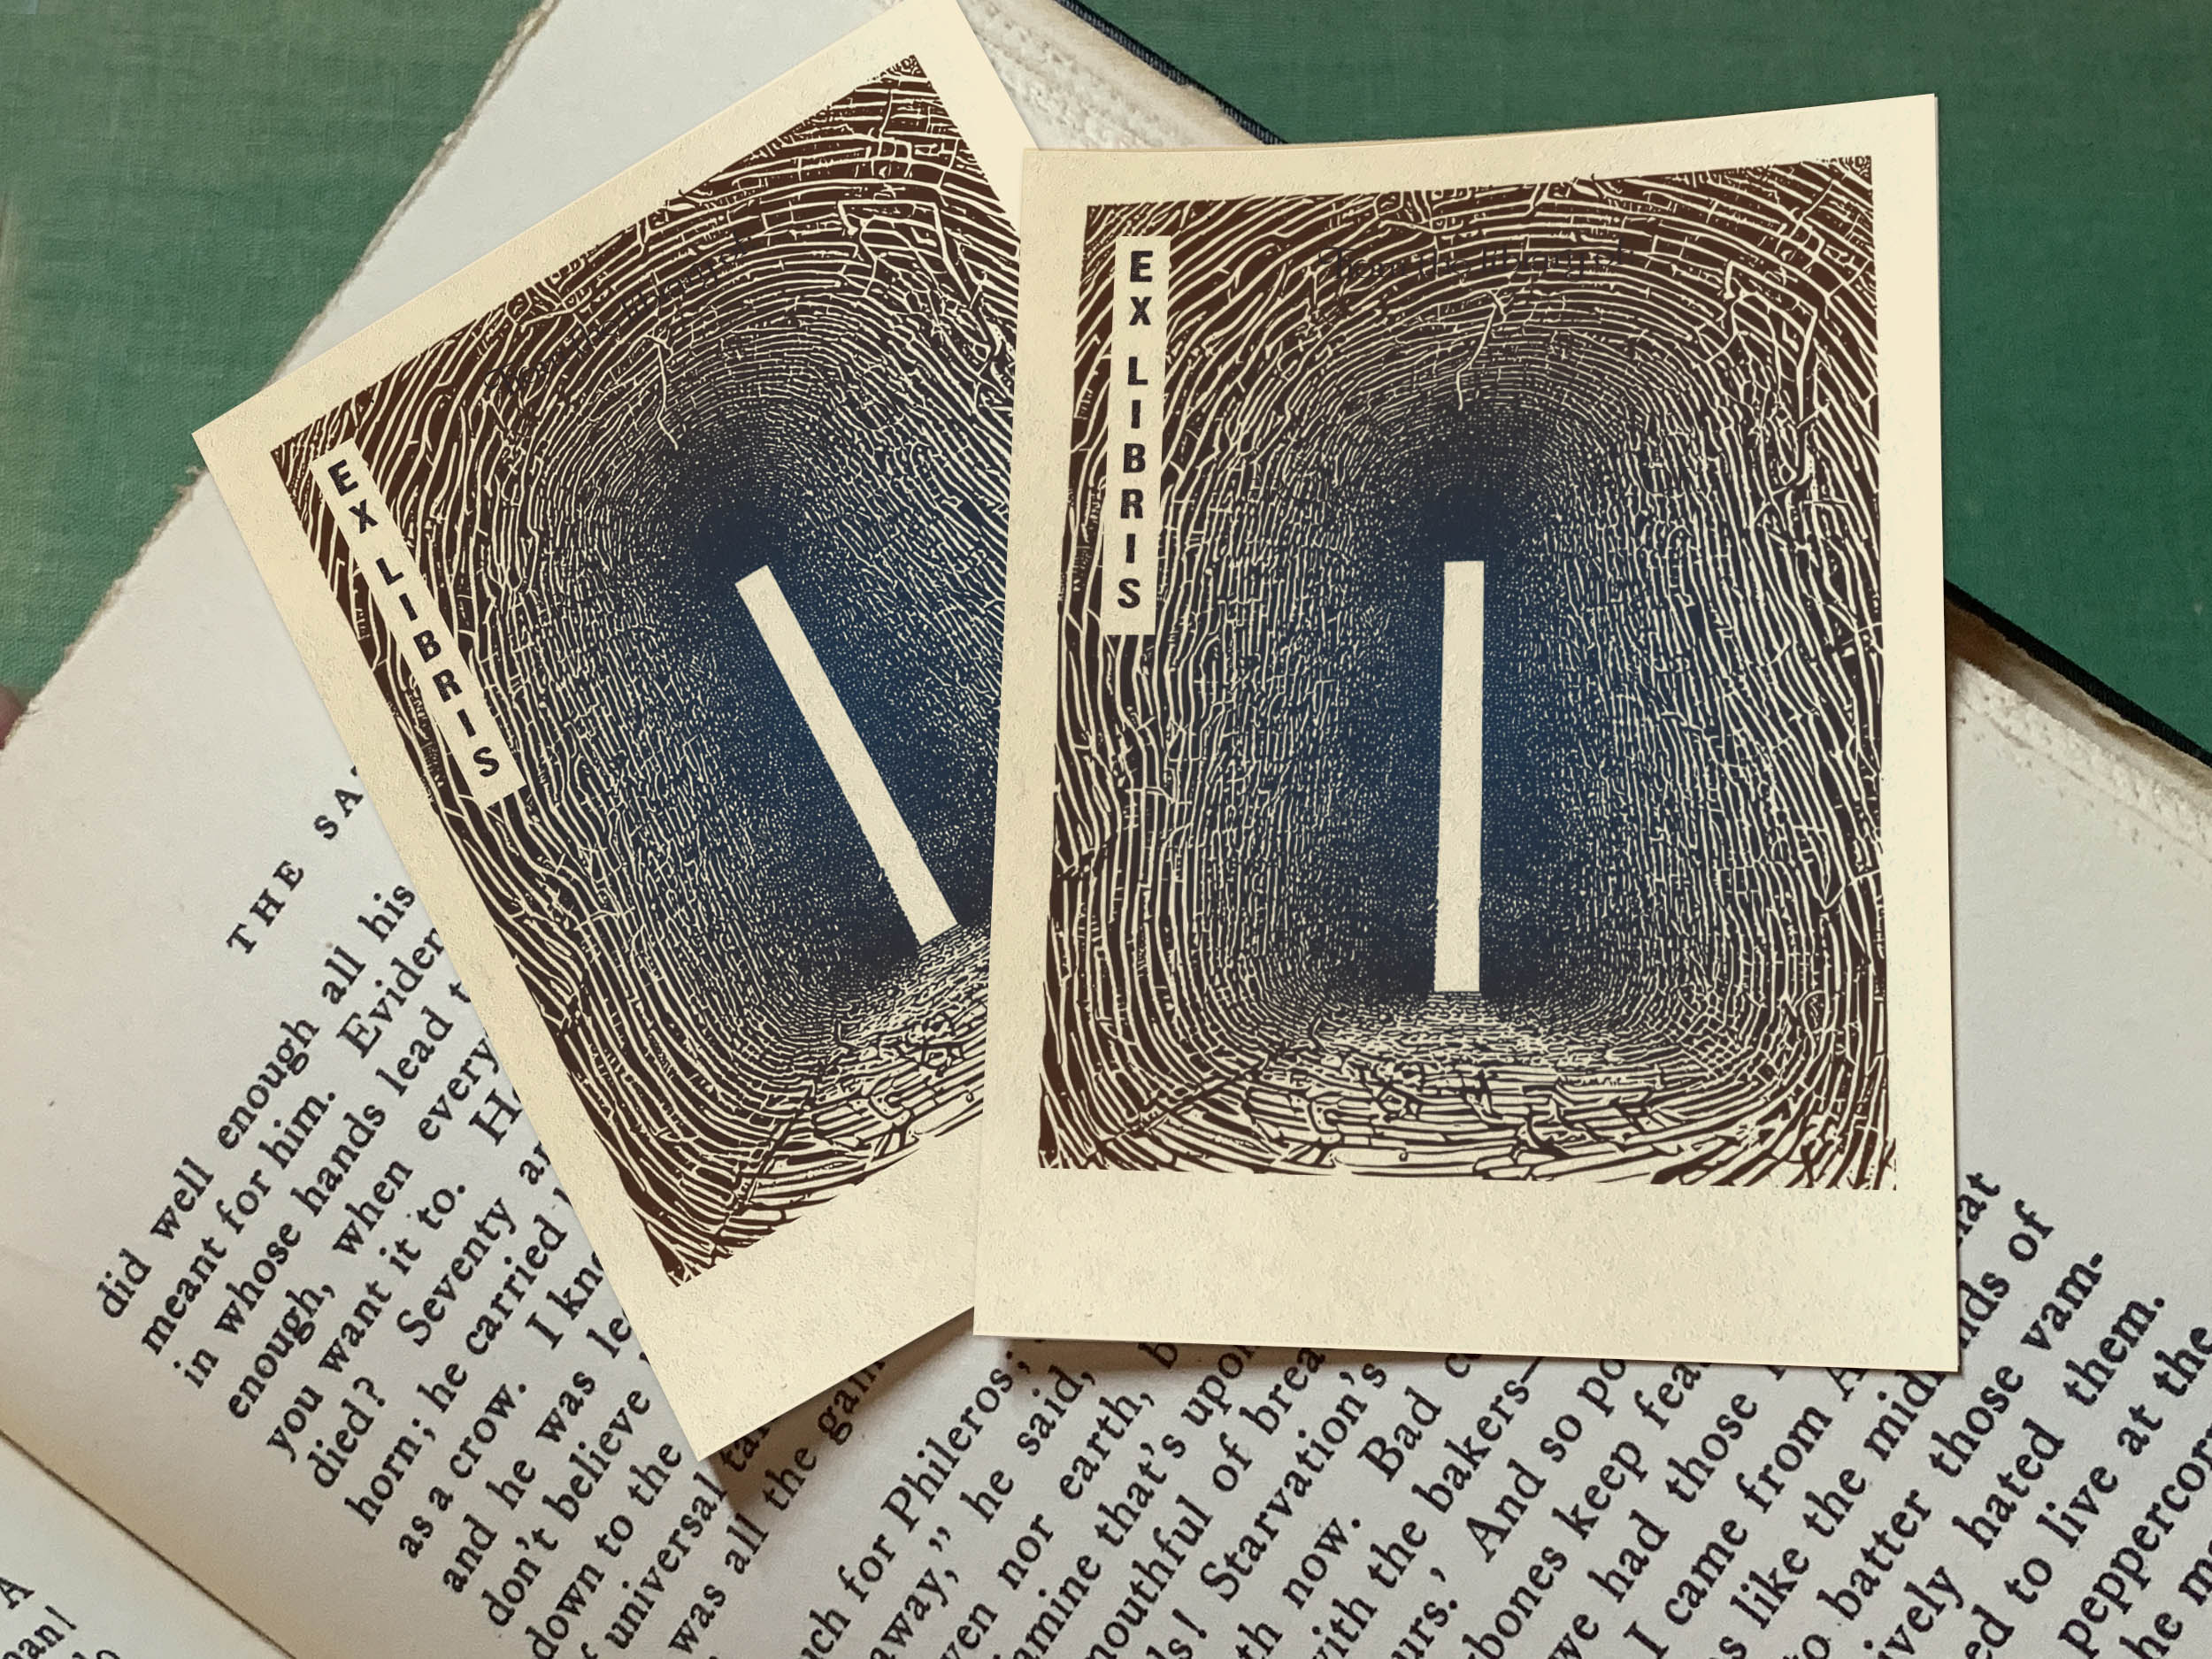 The Tunnel, Personalized Ex-Libris Bookplates, Crafted on Traditional Gummed Paper, 3in x 4in, Set of 30